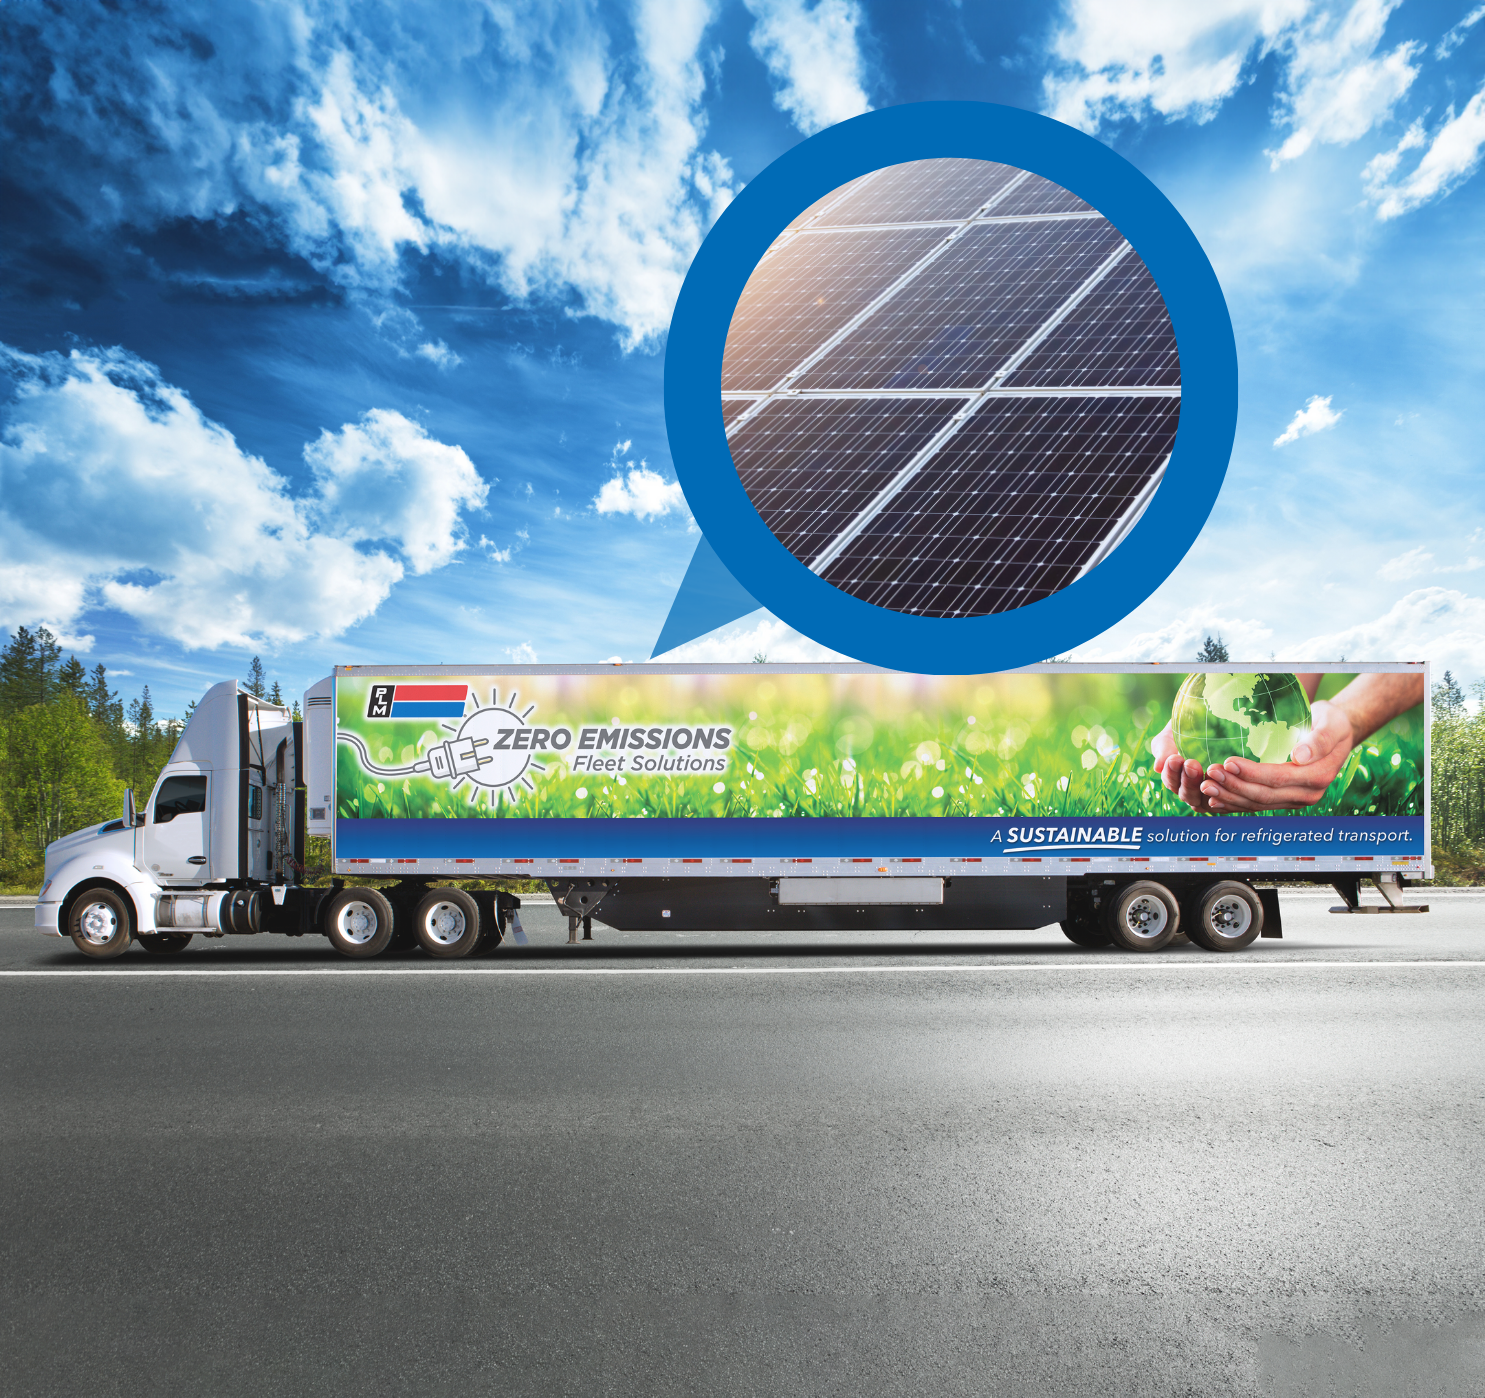 Zero Emissions refrigerated trailer with solar panels on top.